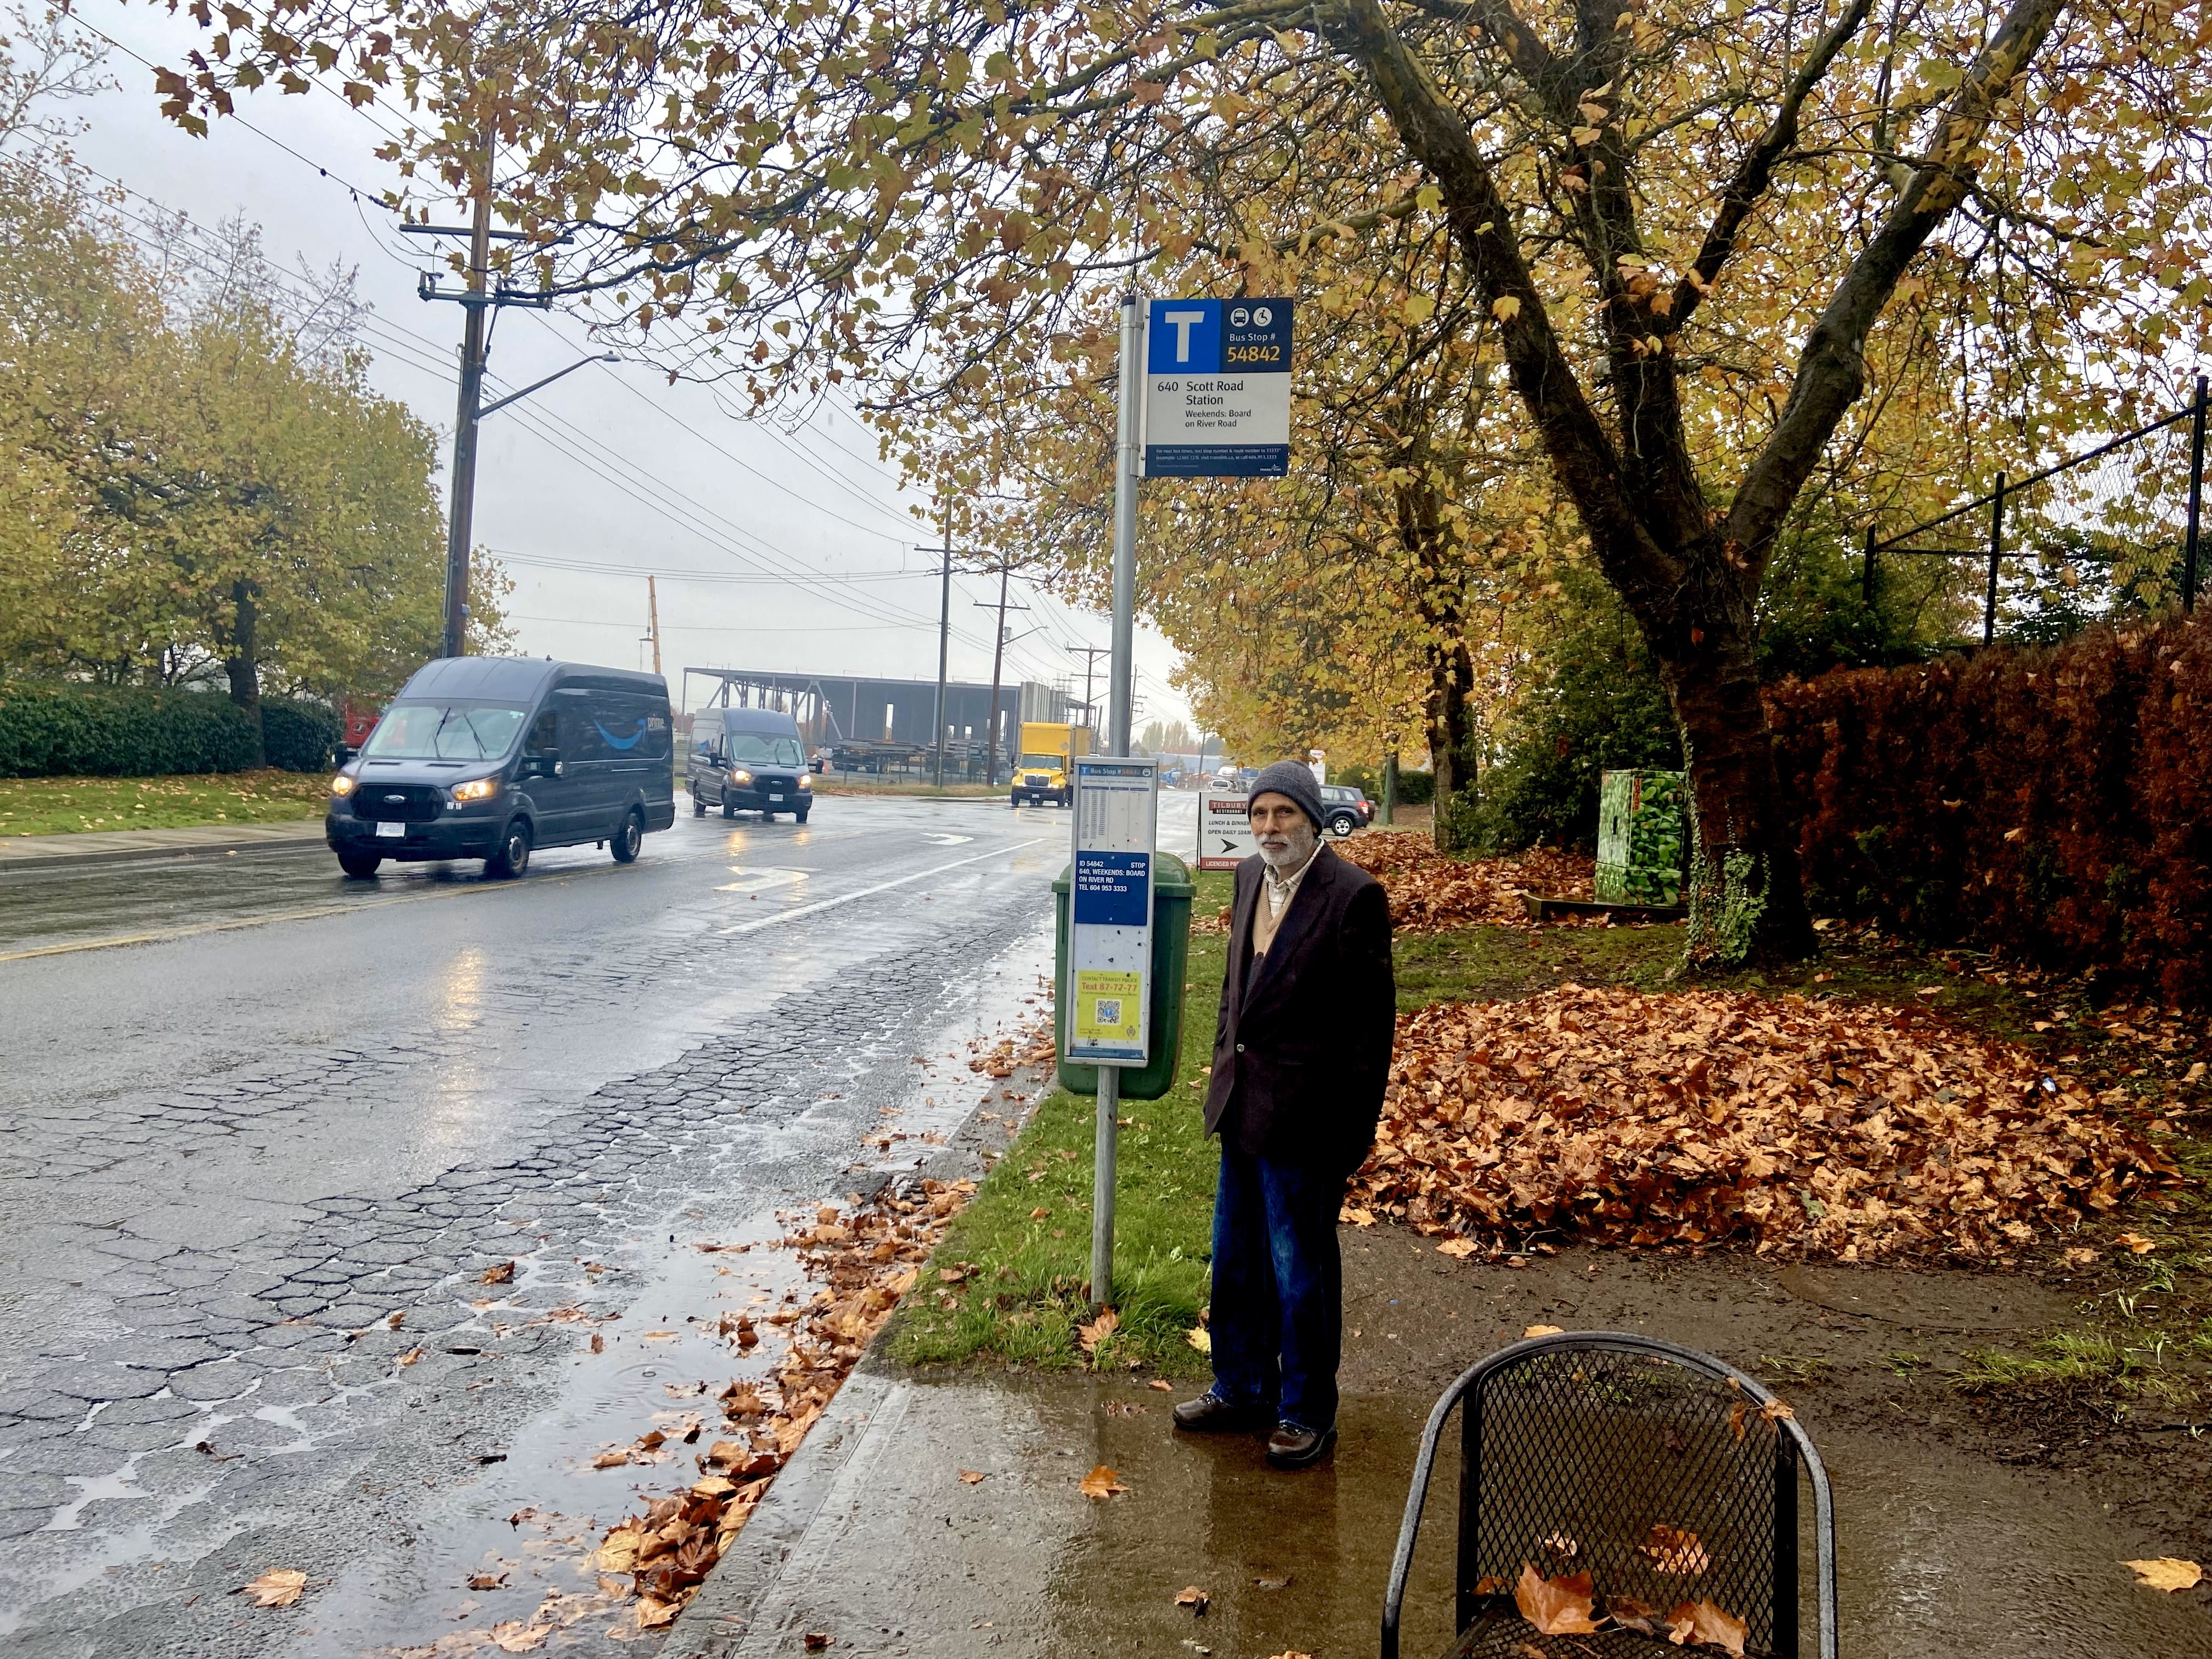 A middle aged South Asian man wearing a jacket and hat stands at a bus stop. The sky is grey and raining. It is Autumn with leaves on the ground. Two Amazon delivery trucks are driving past.